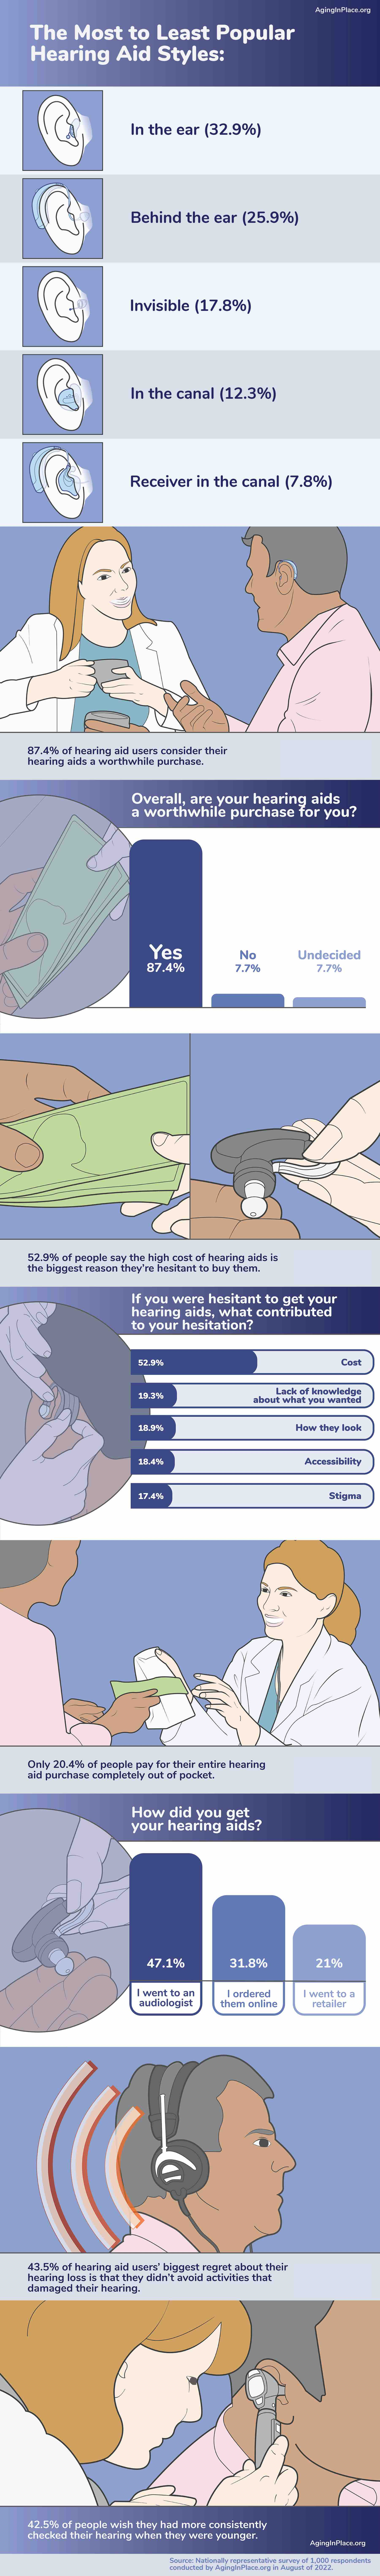 The most to least popular hearing aid style infographic survey conducted by AgingInPlace.org